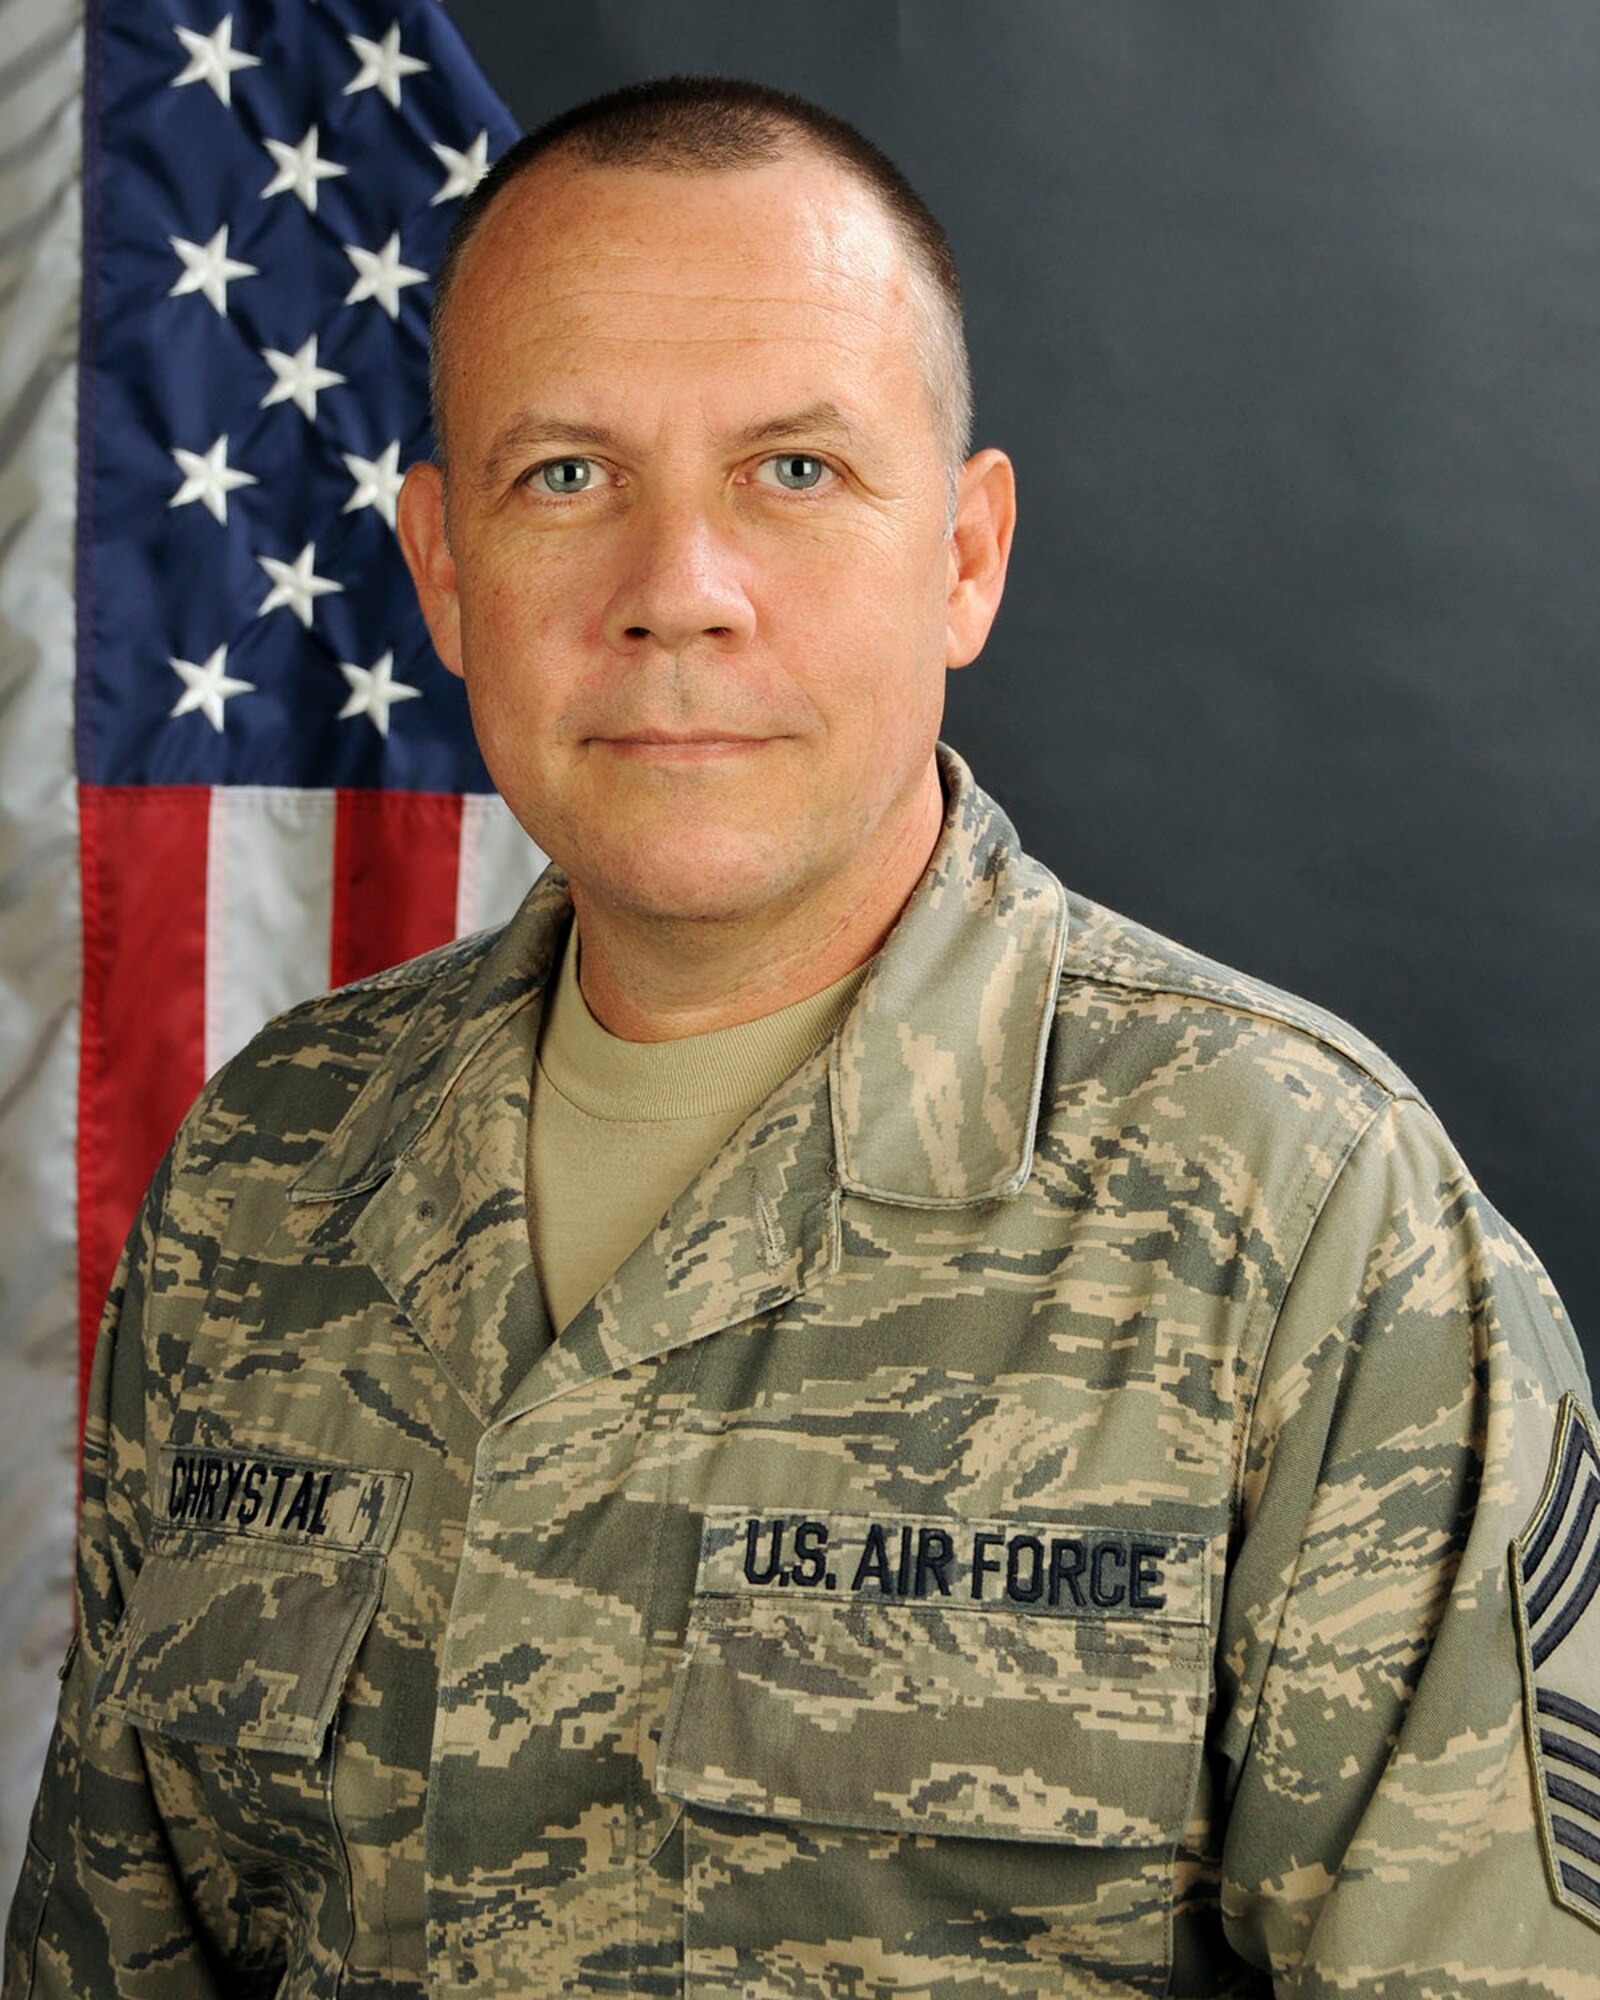 U.S. Air Force Chief Master Sgt. Shawn Chrystal, 169th Force Support Squadron Chief at McEntire Joint National Guard Base of the South Carolina Air National Guard, poses for a portrait, Sept. 12, 2013.   (U.S. Air National Guard photo by Senior Master Sgt. Edward Snyder/Released)